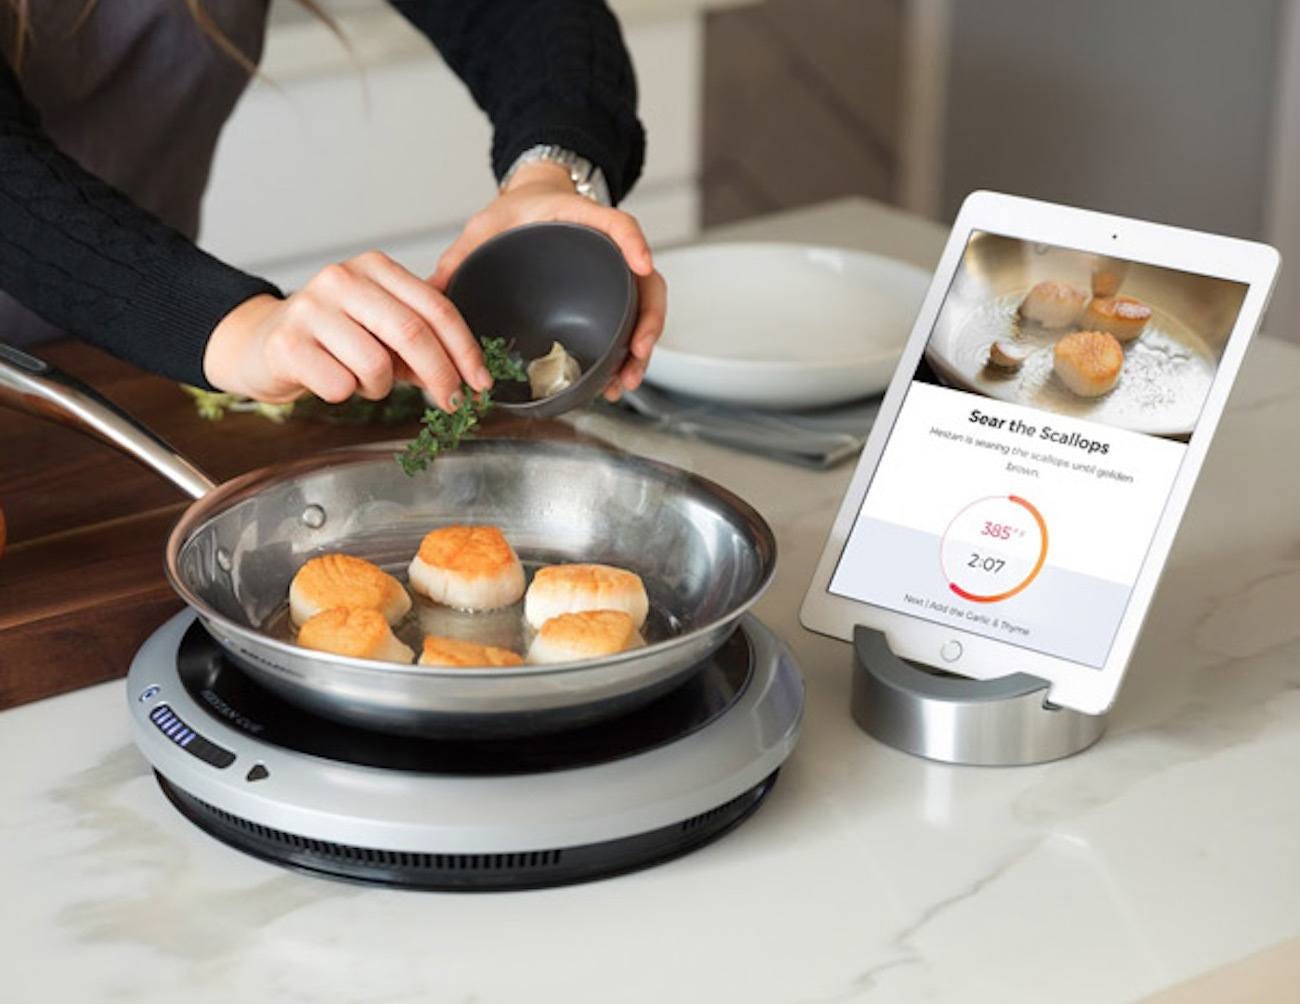 18 Clever kitchen gadgets that will actually upgrade your life » Gadget Flow